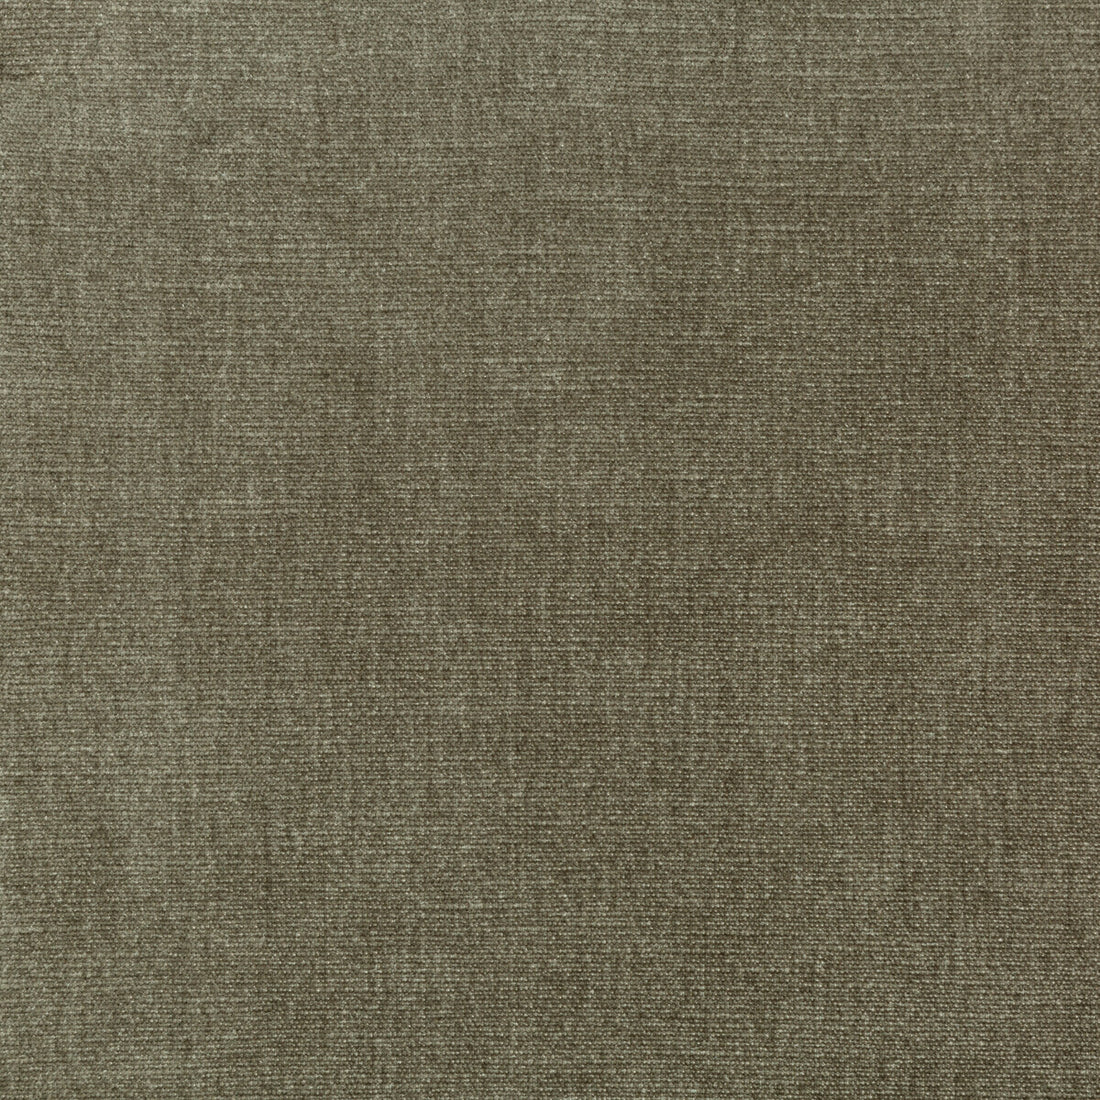 Kravet Smart fabric in 36076-2111 color - pattern 36076.2111.0 - by Kravet Smart in the Sumptuous Chenille II collection